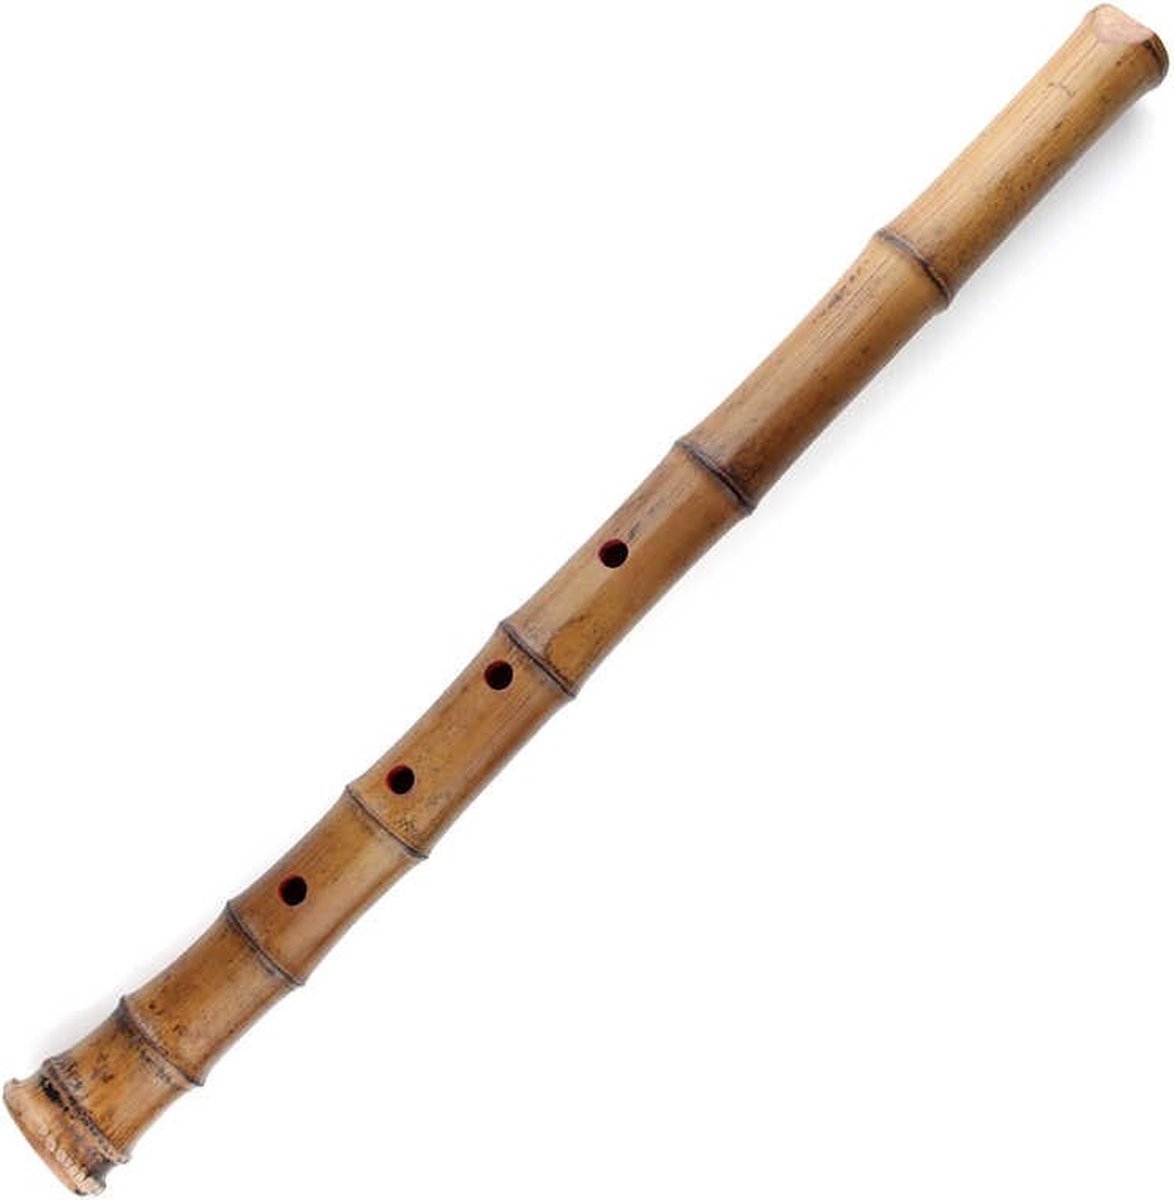 Shakuhachi - Japanese Bamboo Flute as heard in Ghost of Tsushima and Sekiro + Playing Instructions and Bag